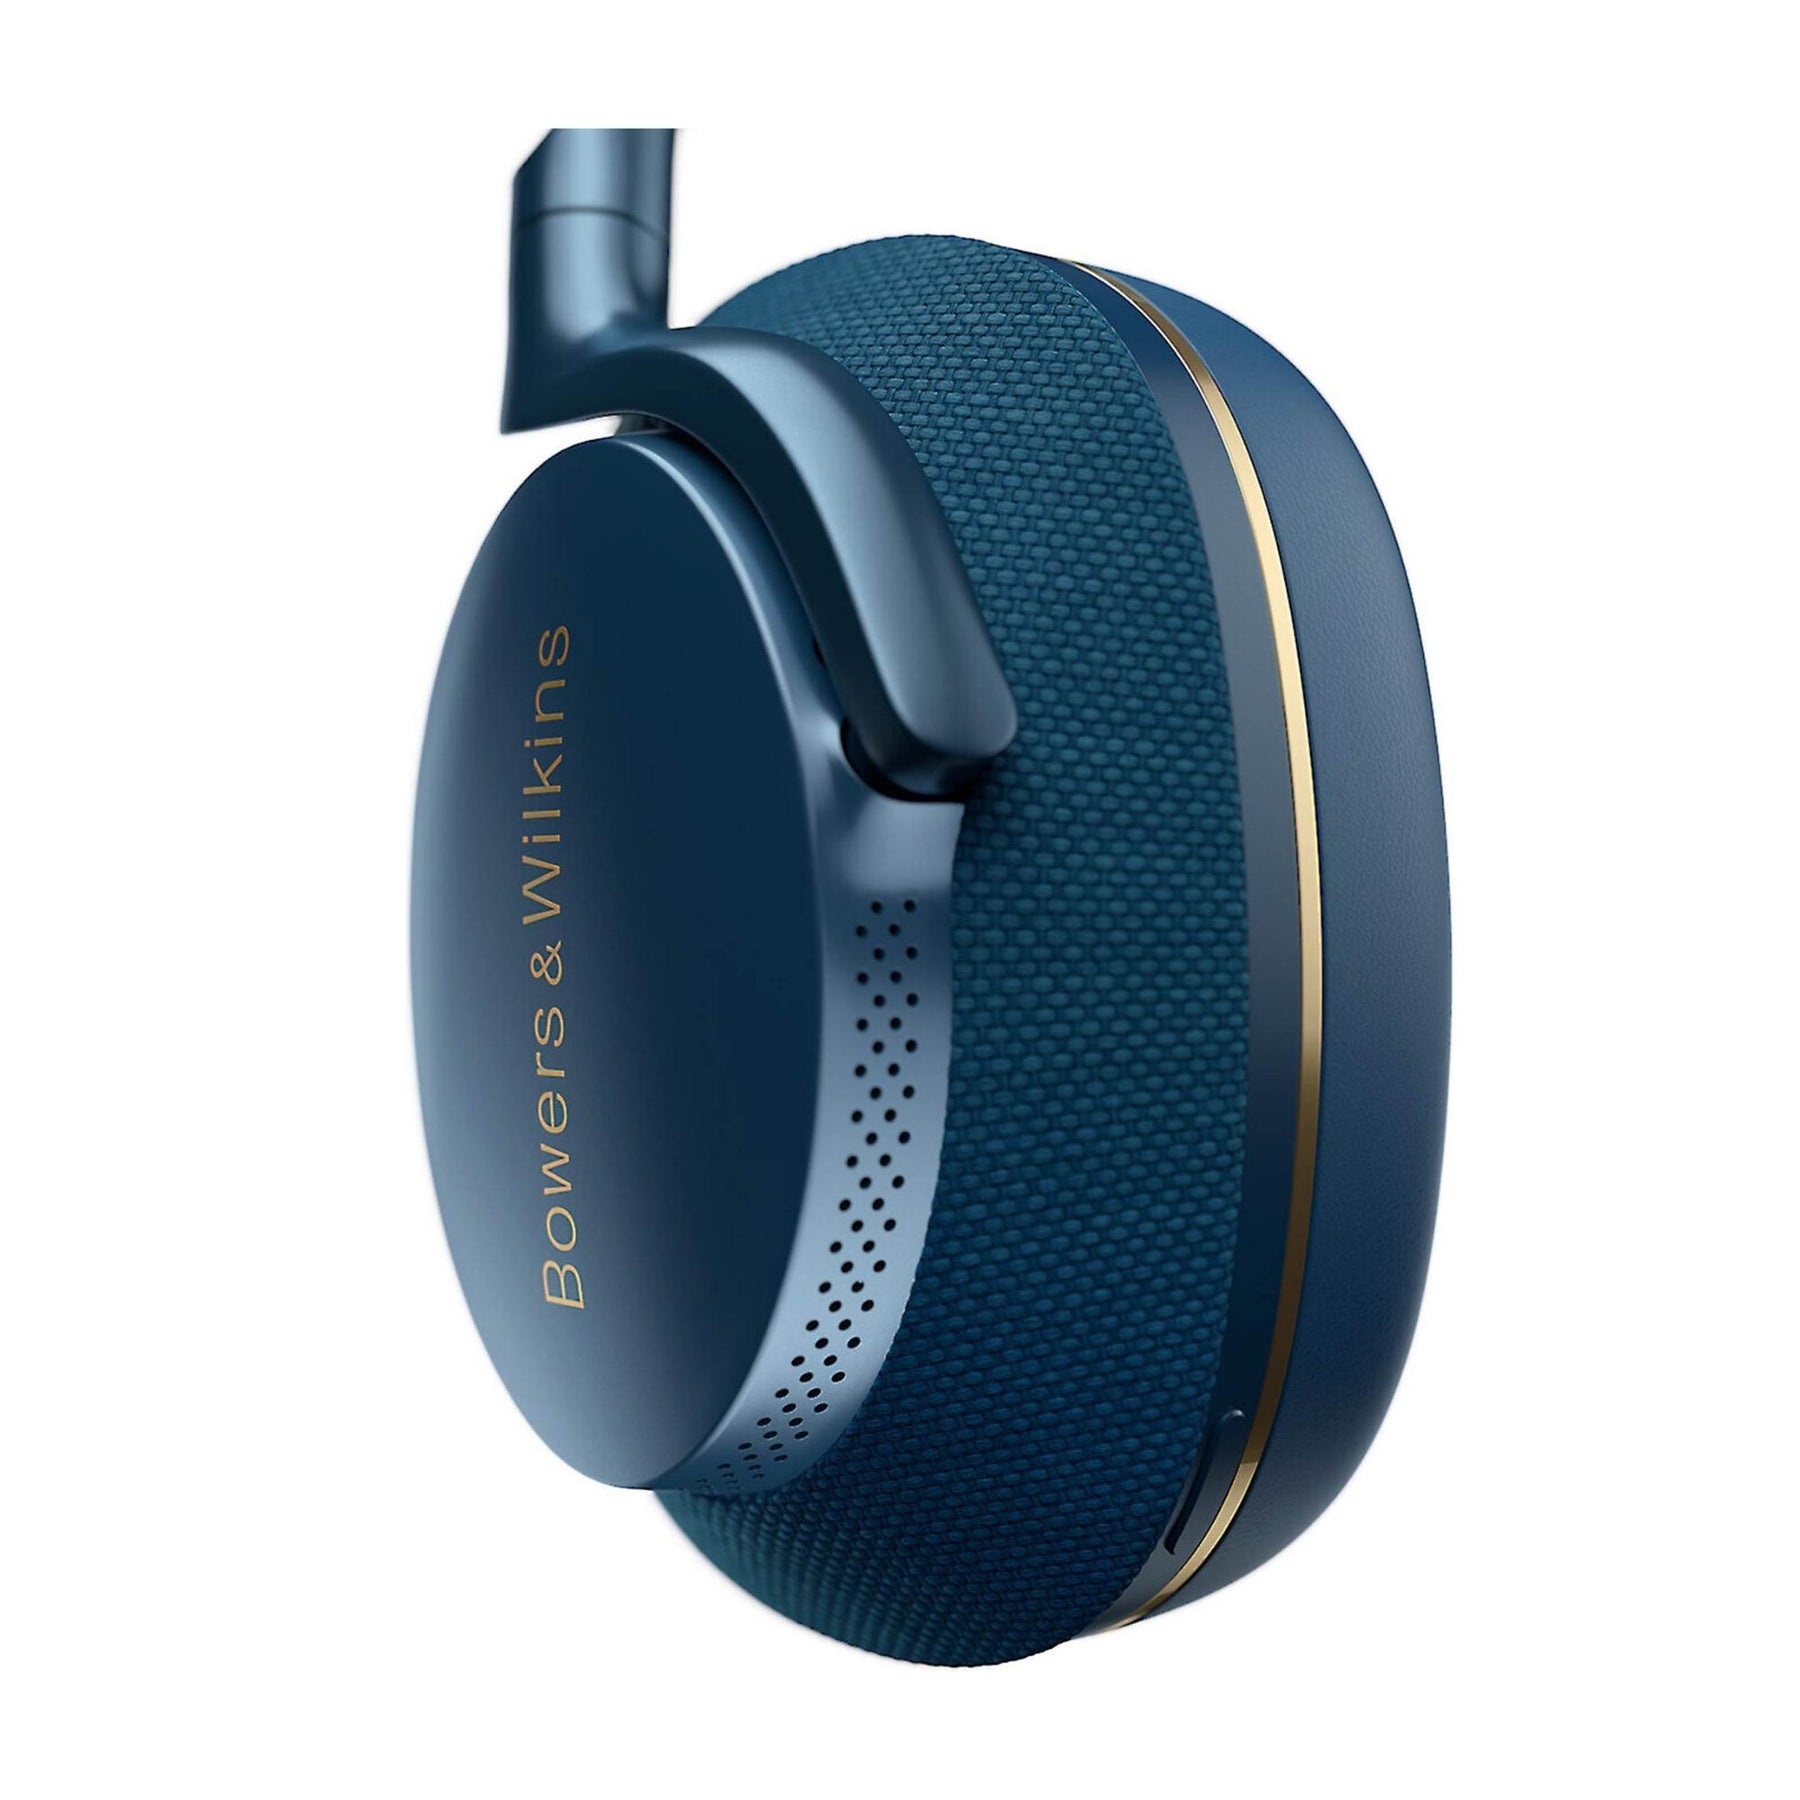 Bowers & Wilkins PX is its first wireless noise-cancelling